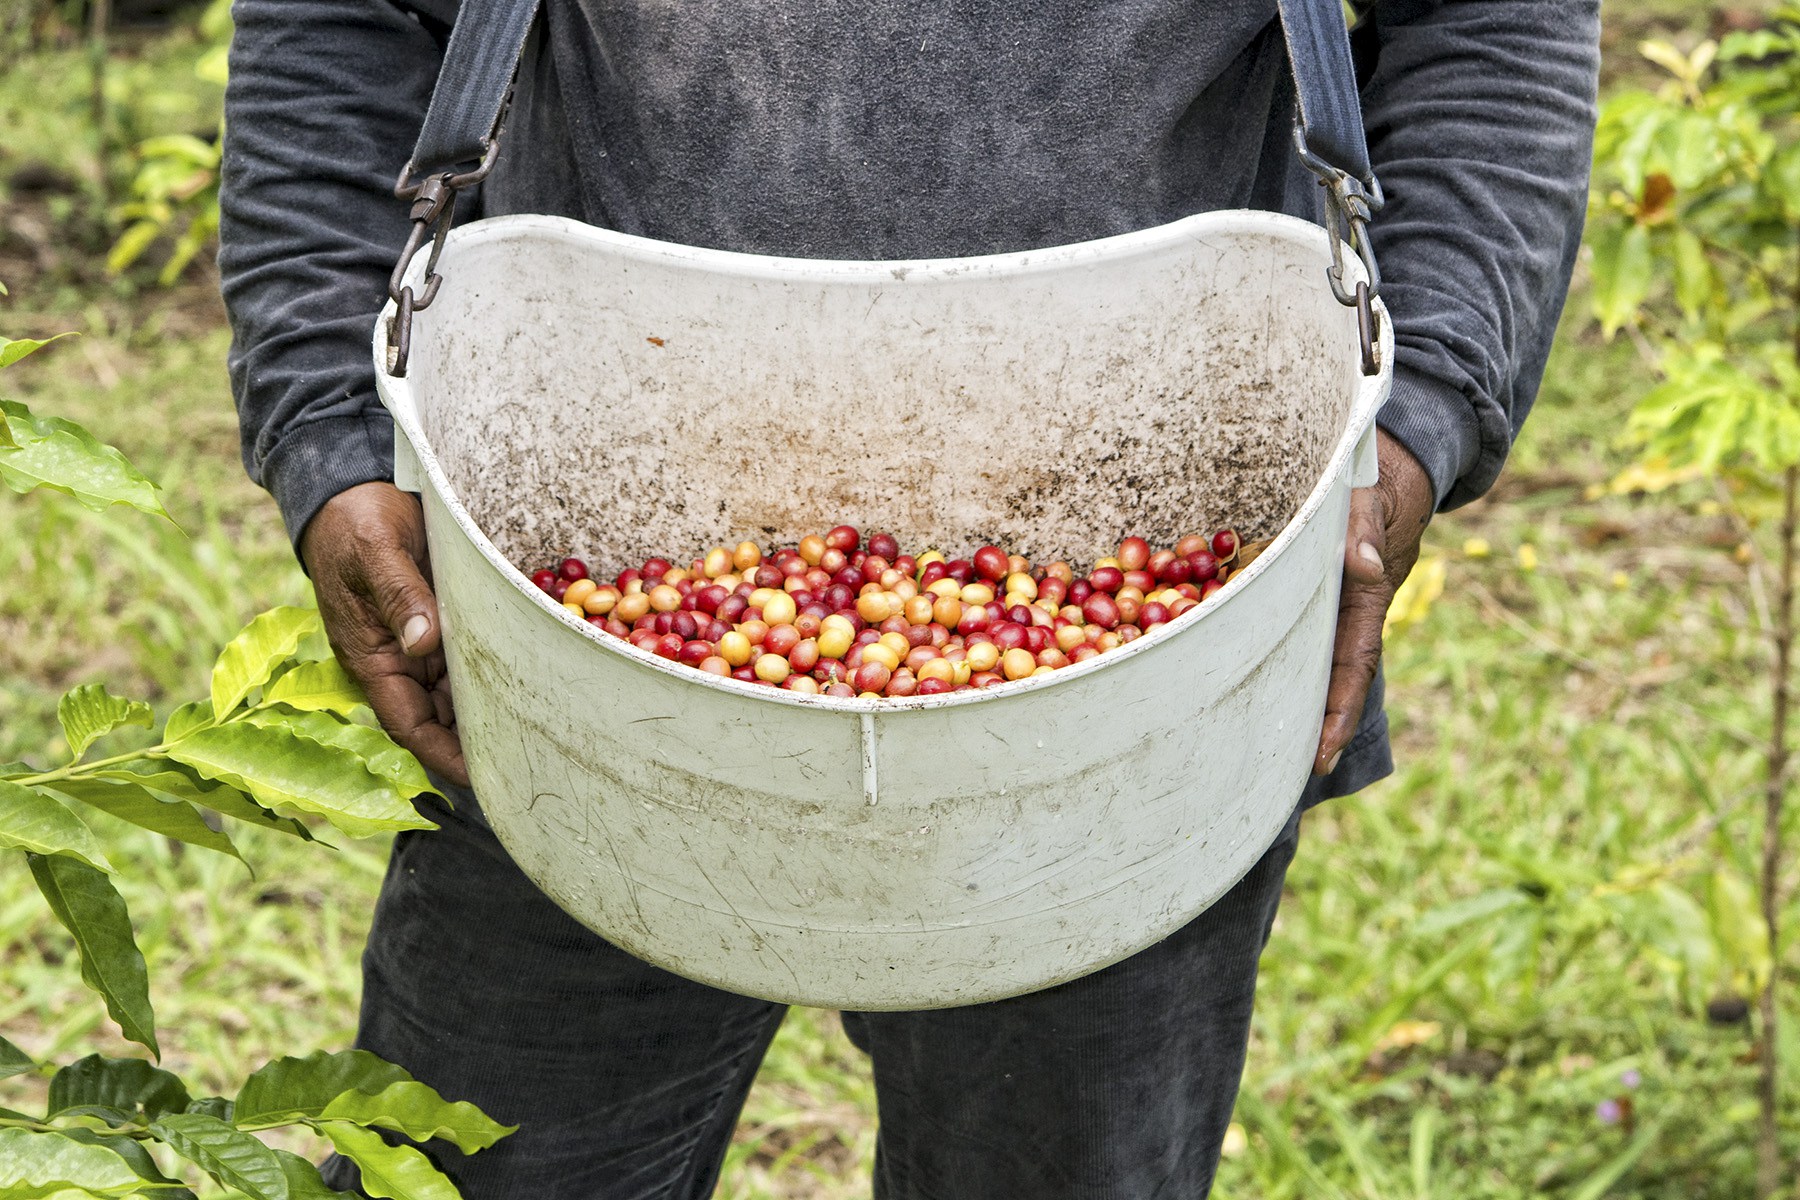 A worker collects coffee cherries in a basket